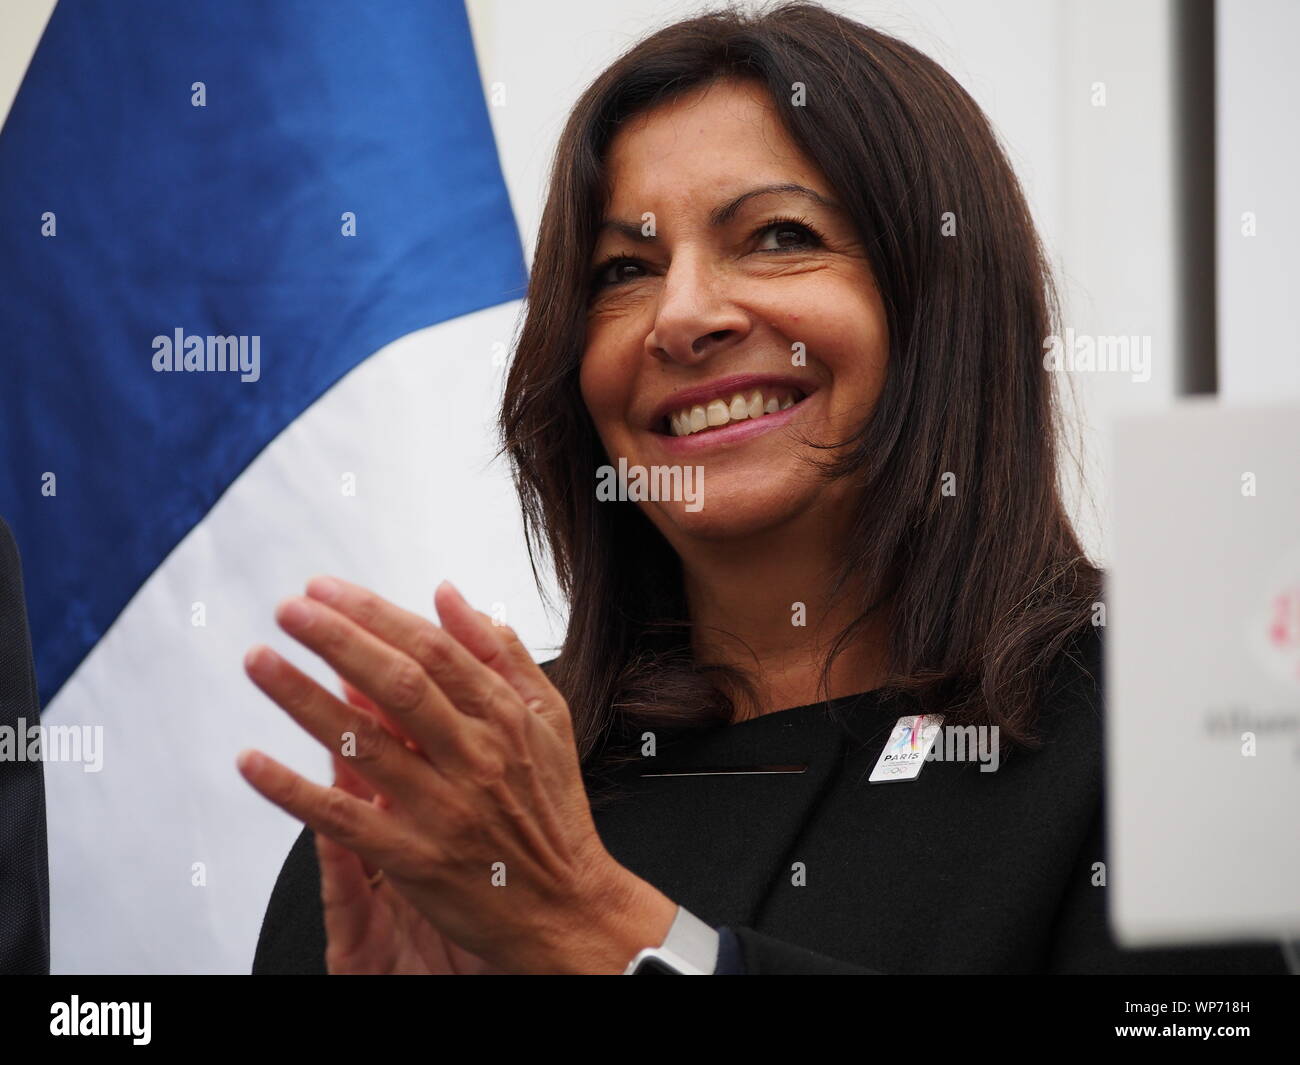 Anne Hidalgo, mayor of Paris, gives a speech to support the candidacy of that city as the venue for the Olympic Games 2024 at the 130th session of the International Olympic Committee which is being held in Lima. Stock Photo